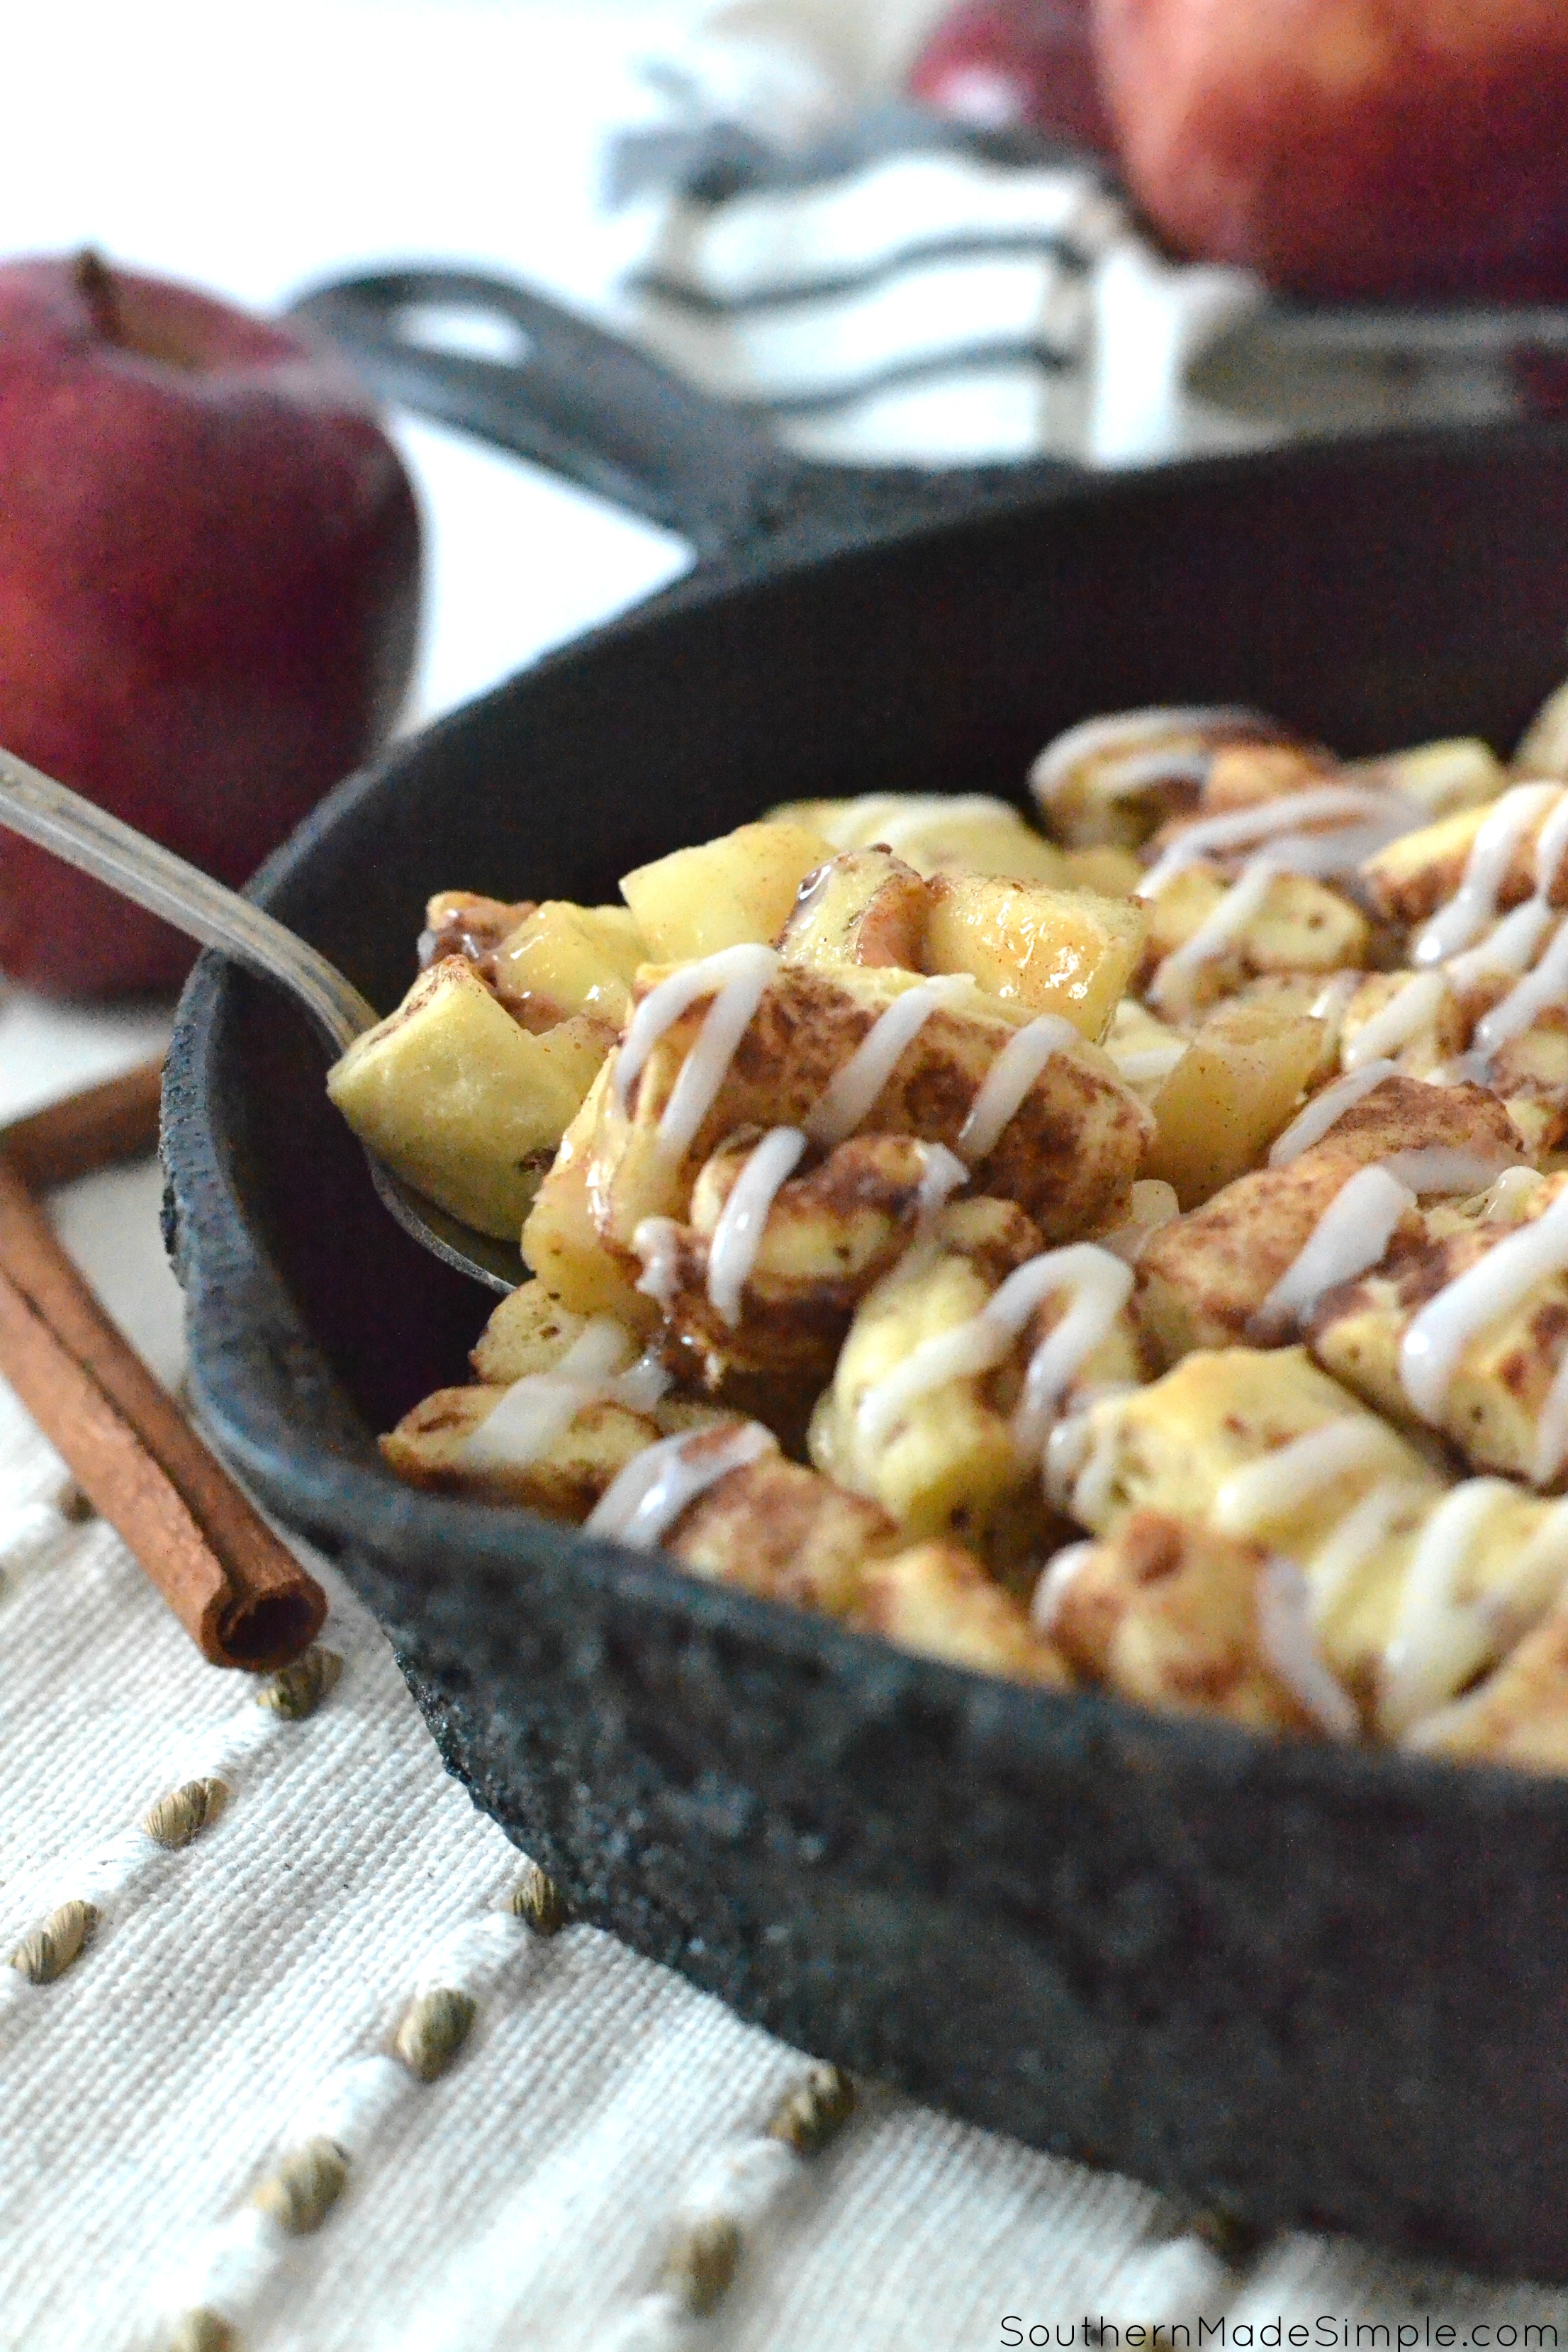 This Cinnamon Roll Apple Cobbler captures the flavors of fall perfectly! Add a scoop of ice cream and you're in for a real treat! #Apples #Cinnamonrolls #Cobbler